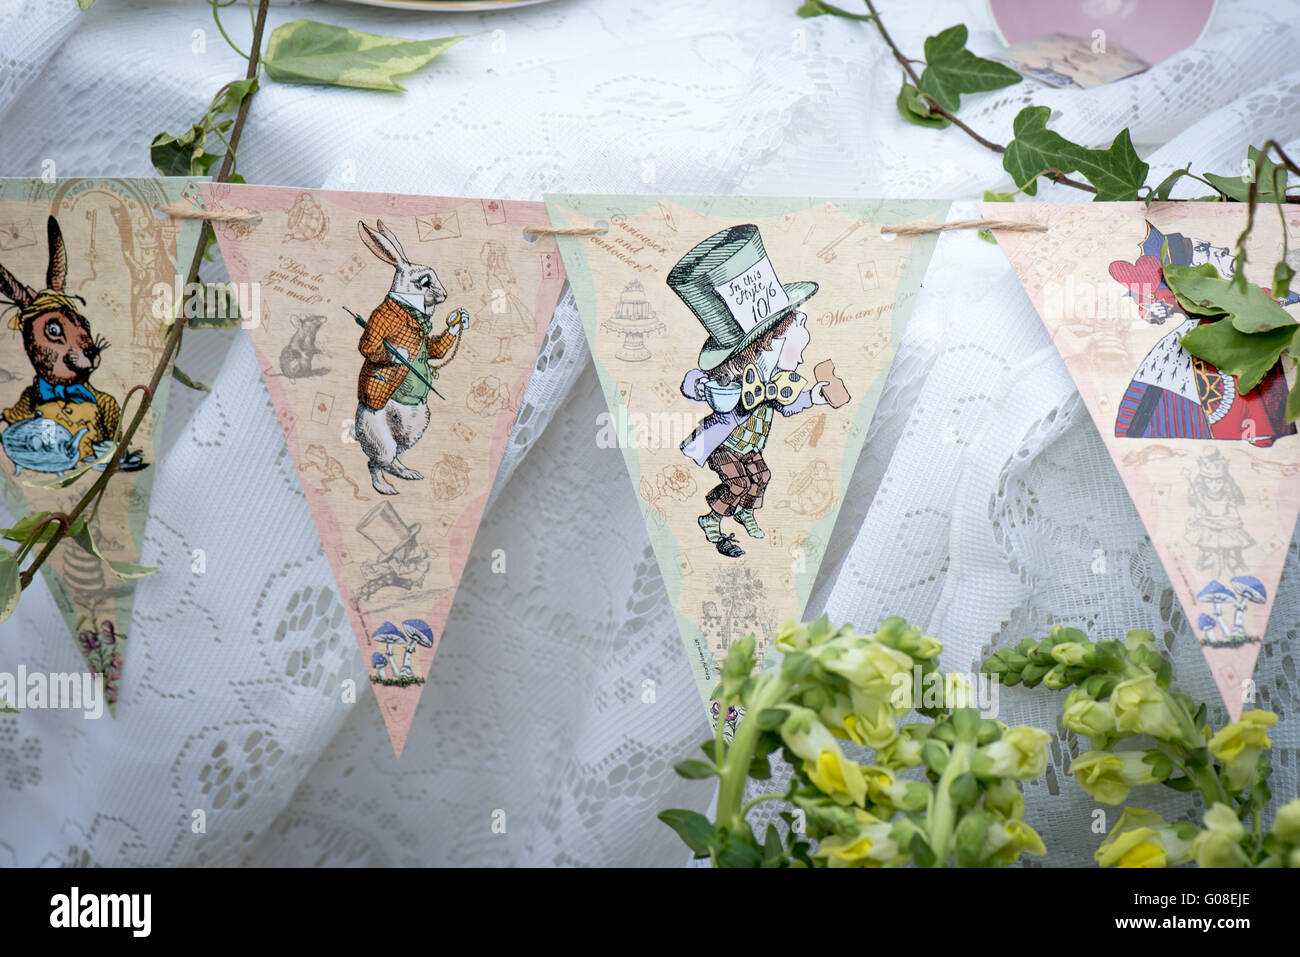 Mad Hatter Afternoon Tea Party Decorations At Cake